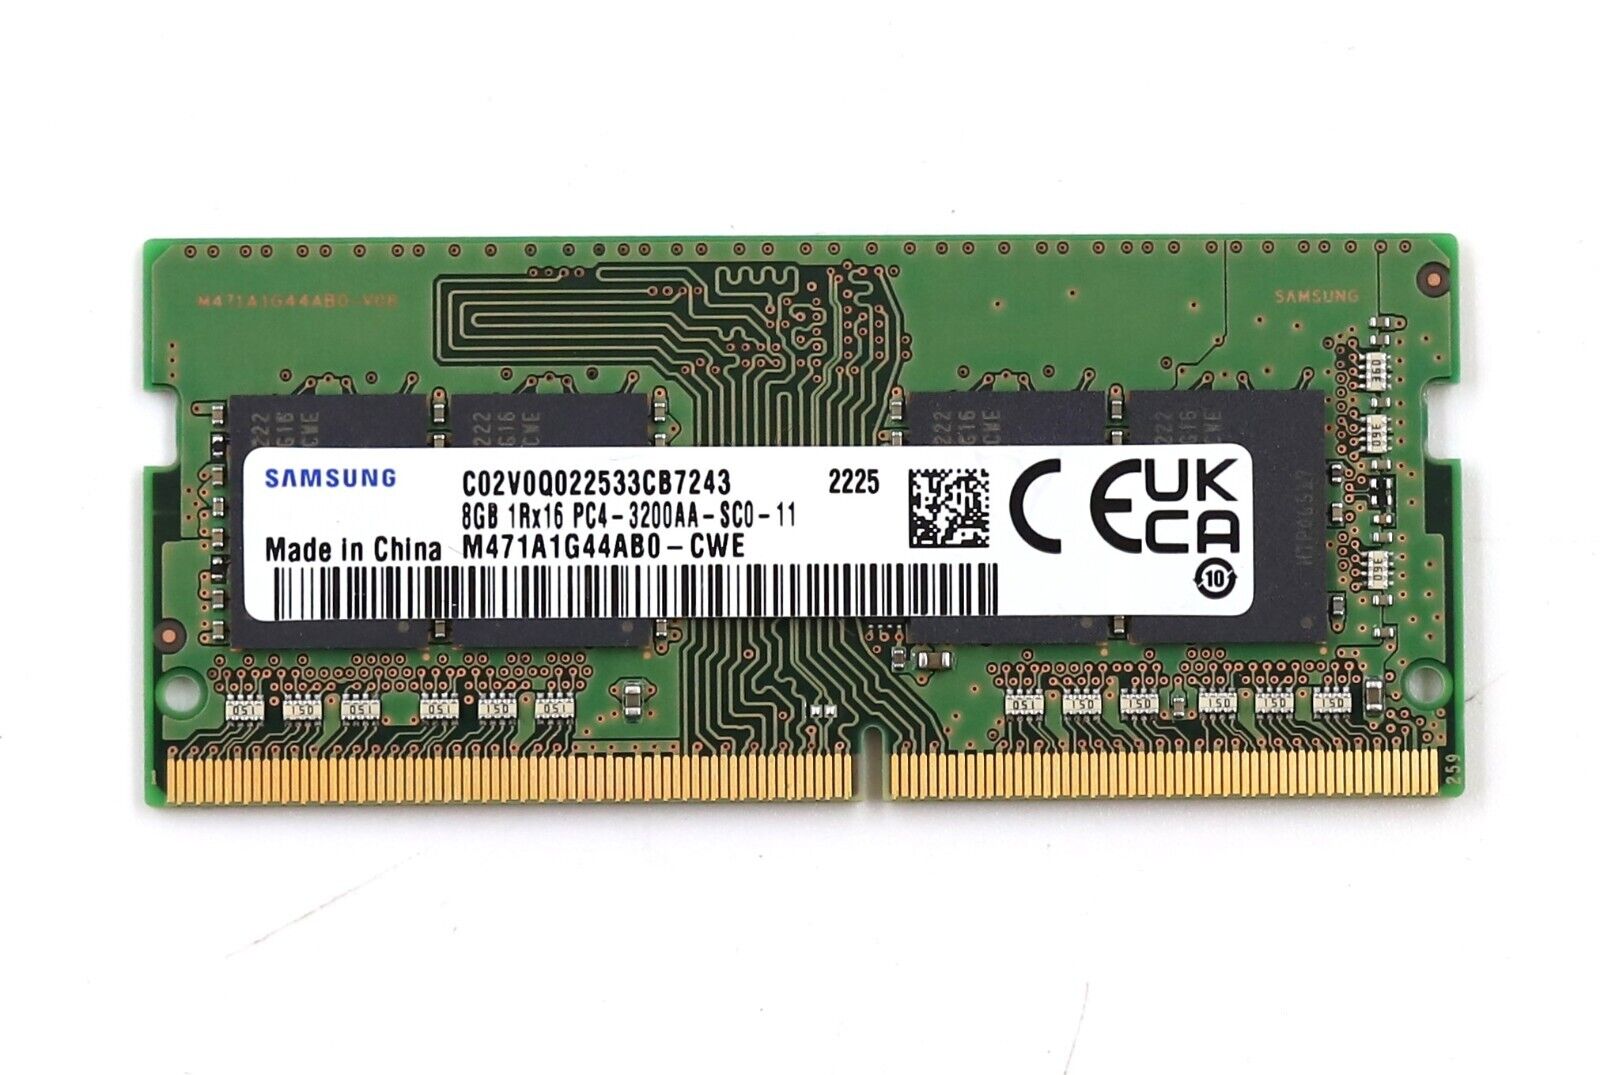 Samsung 8GB 1Rx16 PC4-3200AA-SC0-11 Laptop Memory M471A1G44AB0-CWE Tested